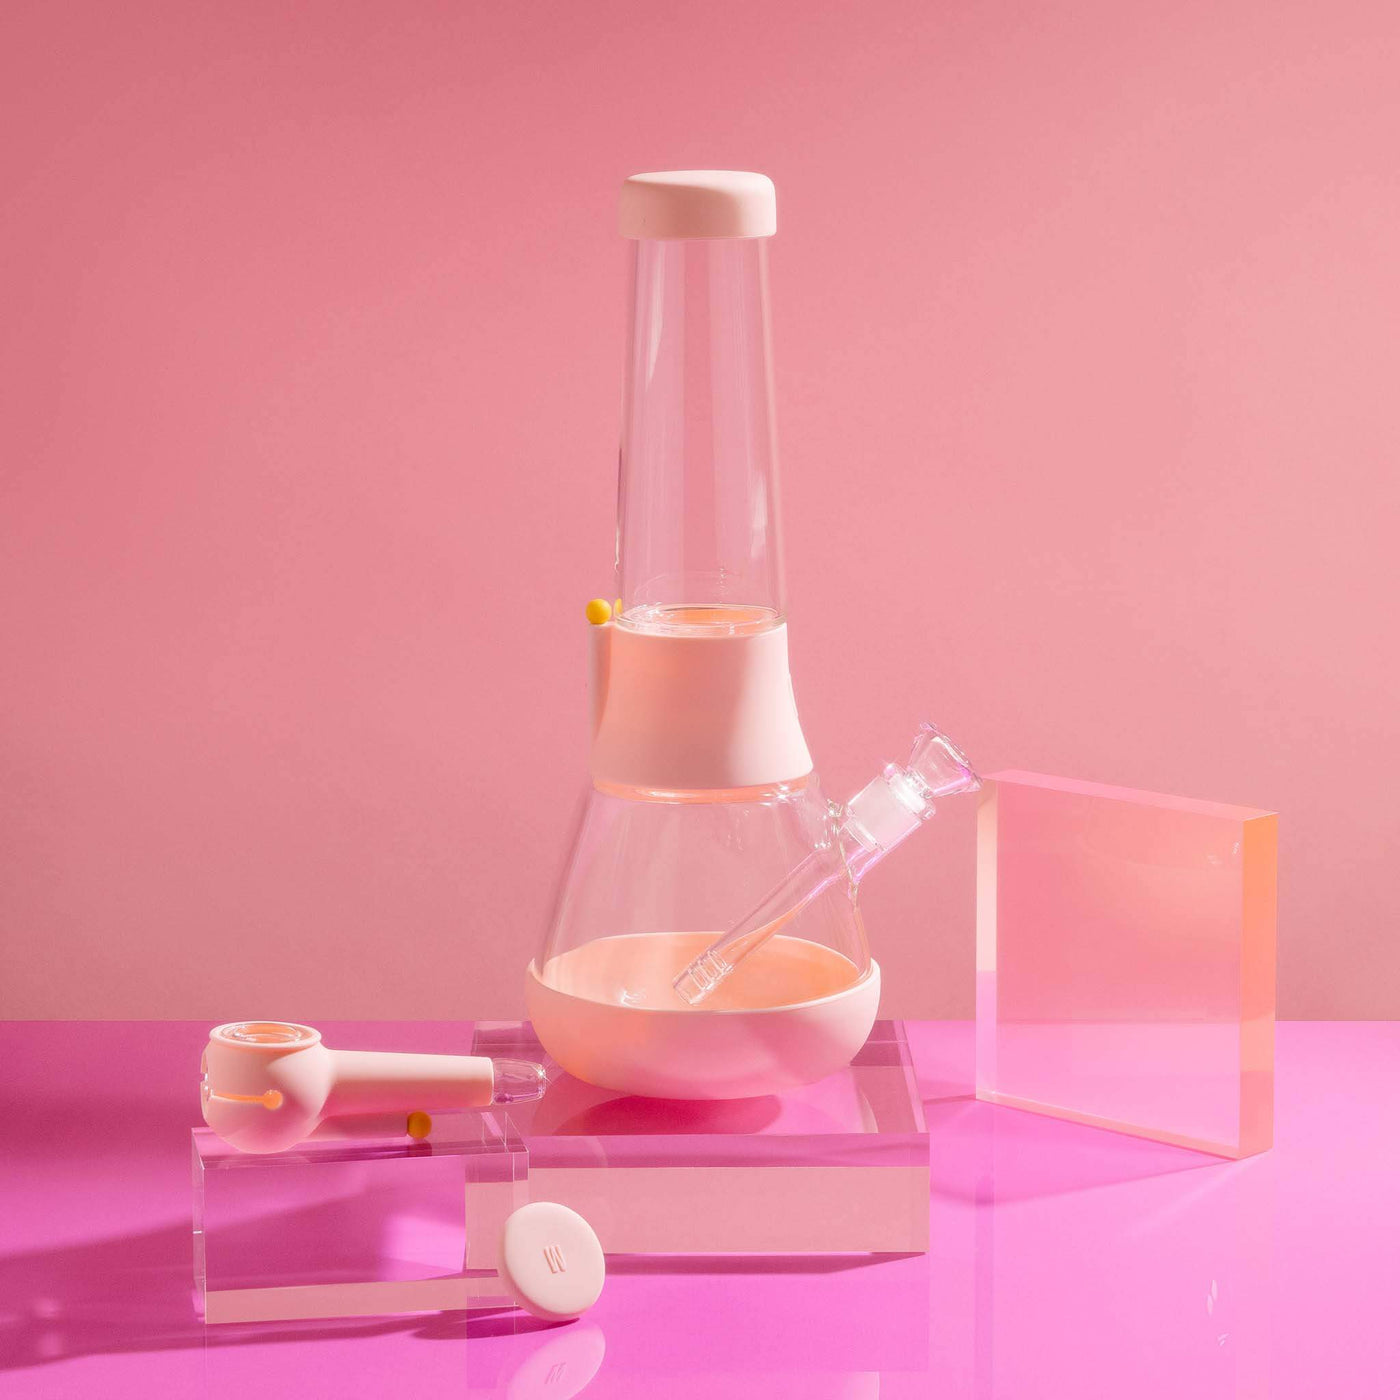  A bundle set of the Weeday beaker bong and silicone pipe with glass bowl, sitting on acrylic blocks, showcased in a bubblegum pink studio setting.